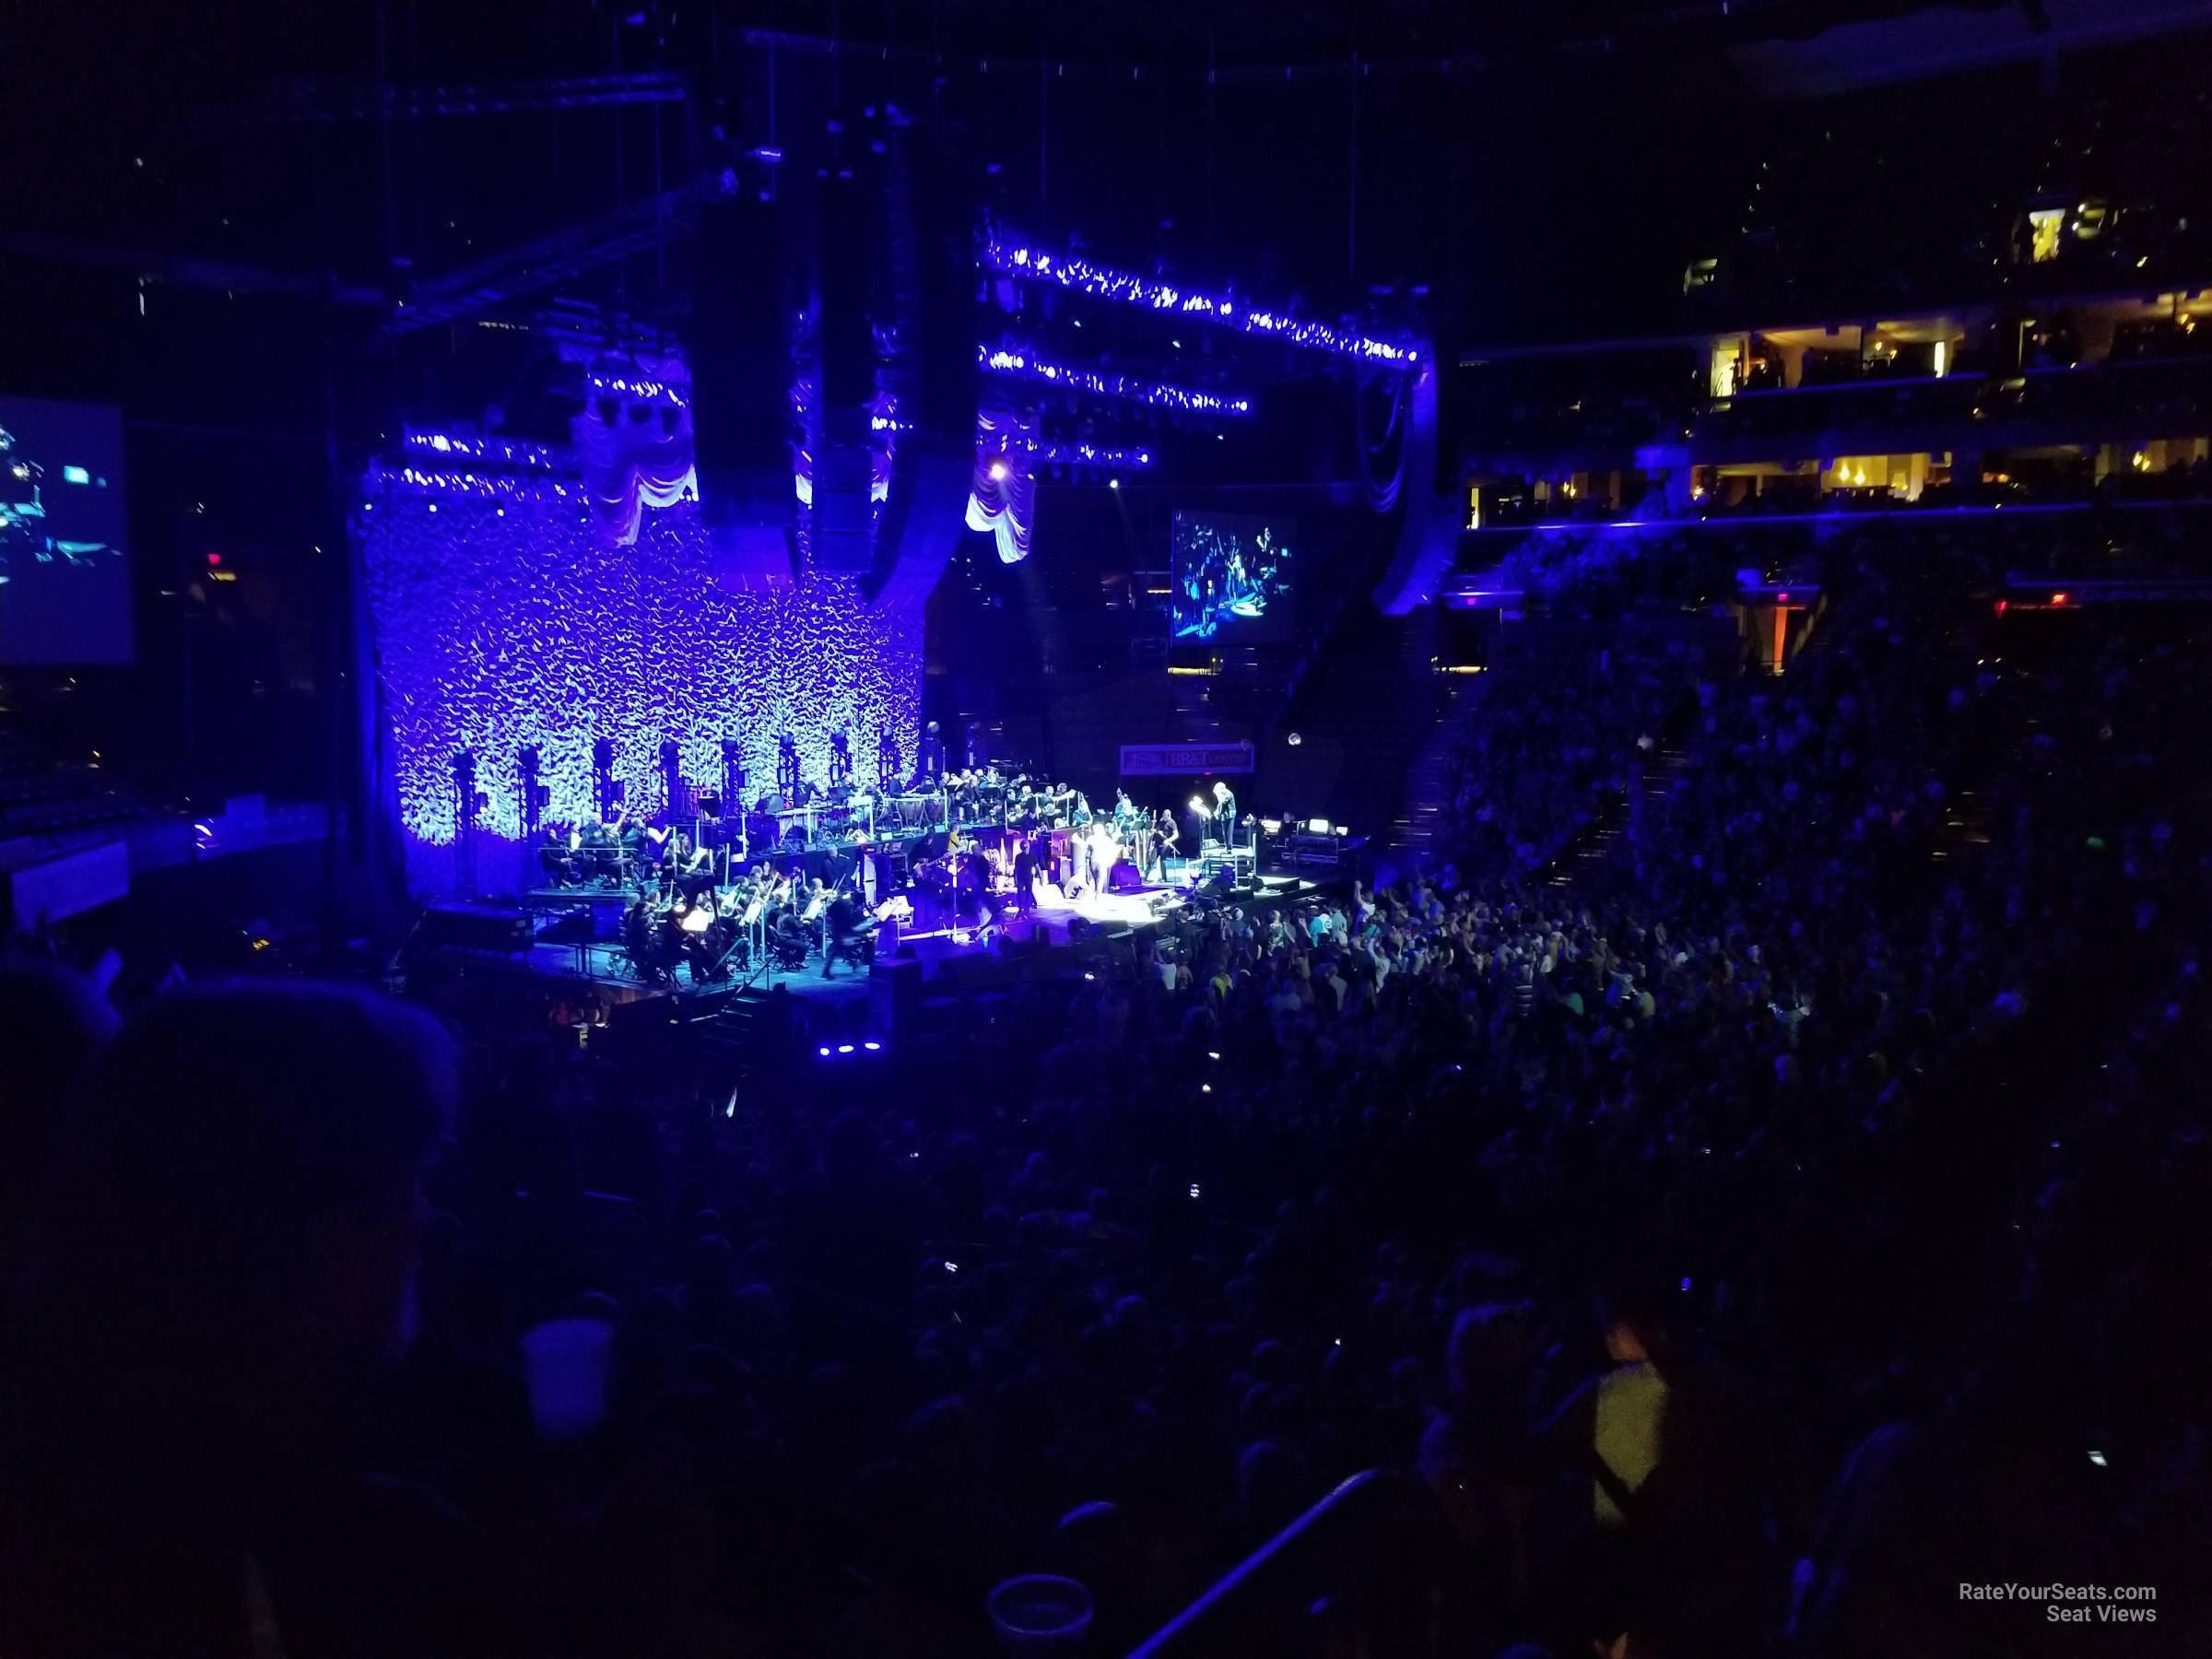 Section 119 at BB&T Center for Concerts